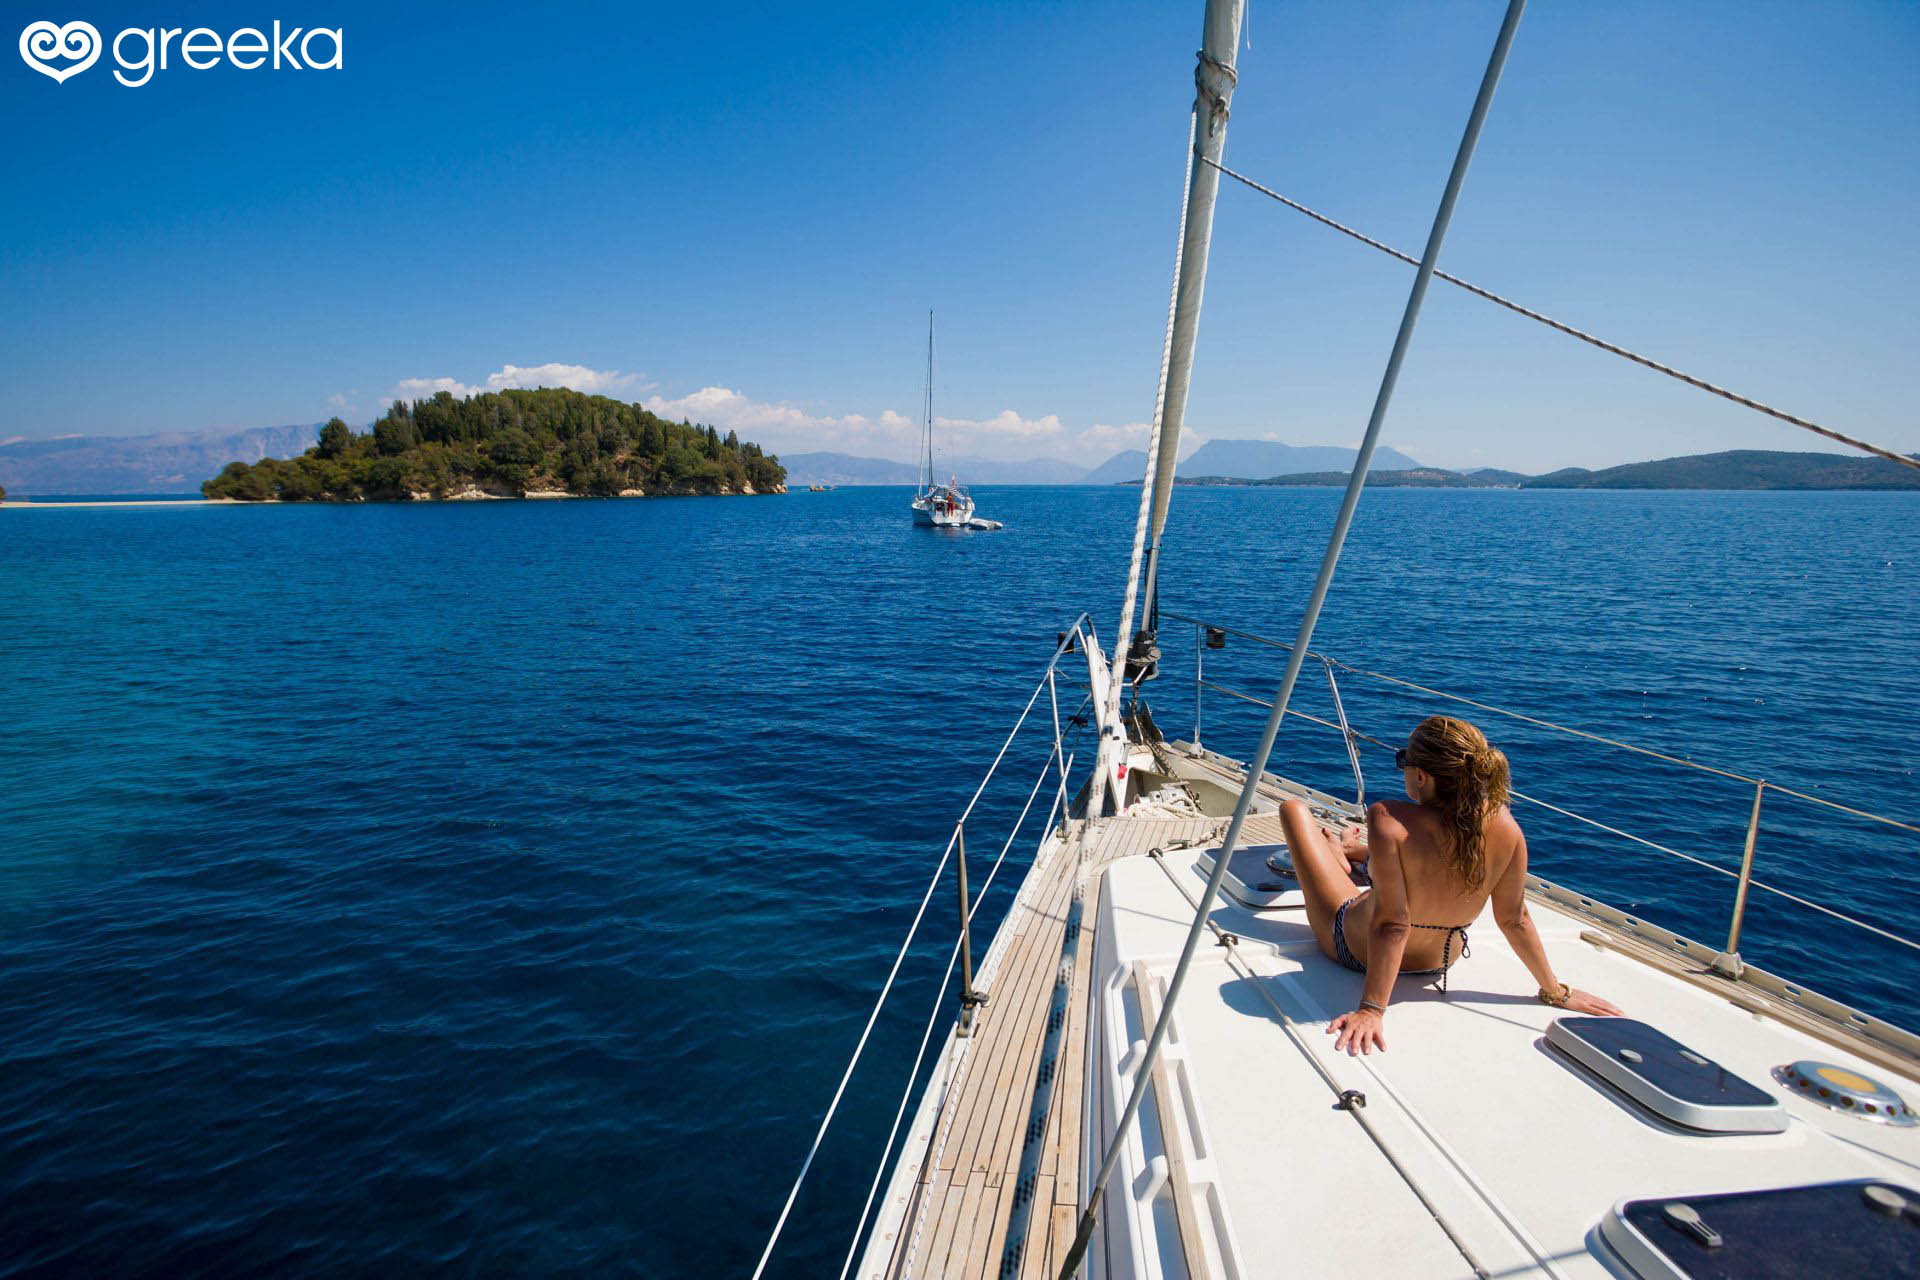 rent a yacht in athens greece